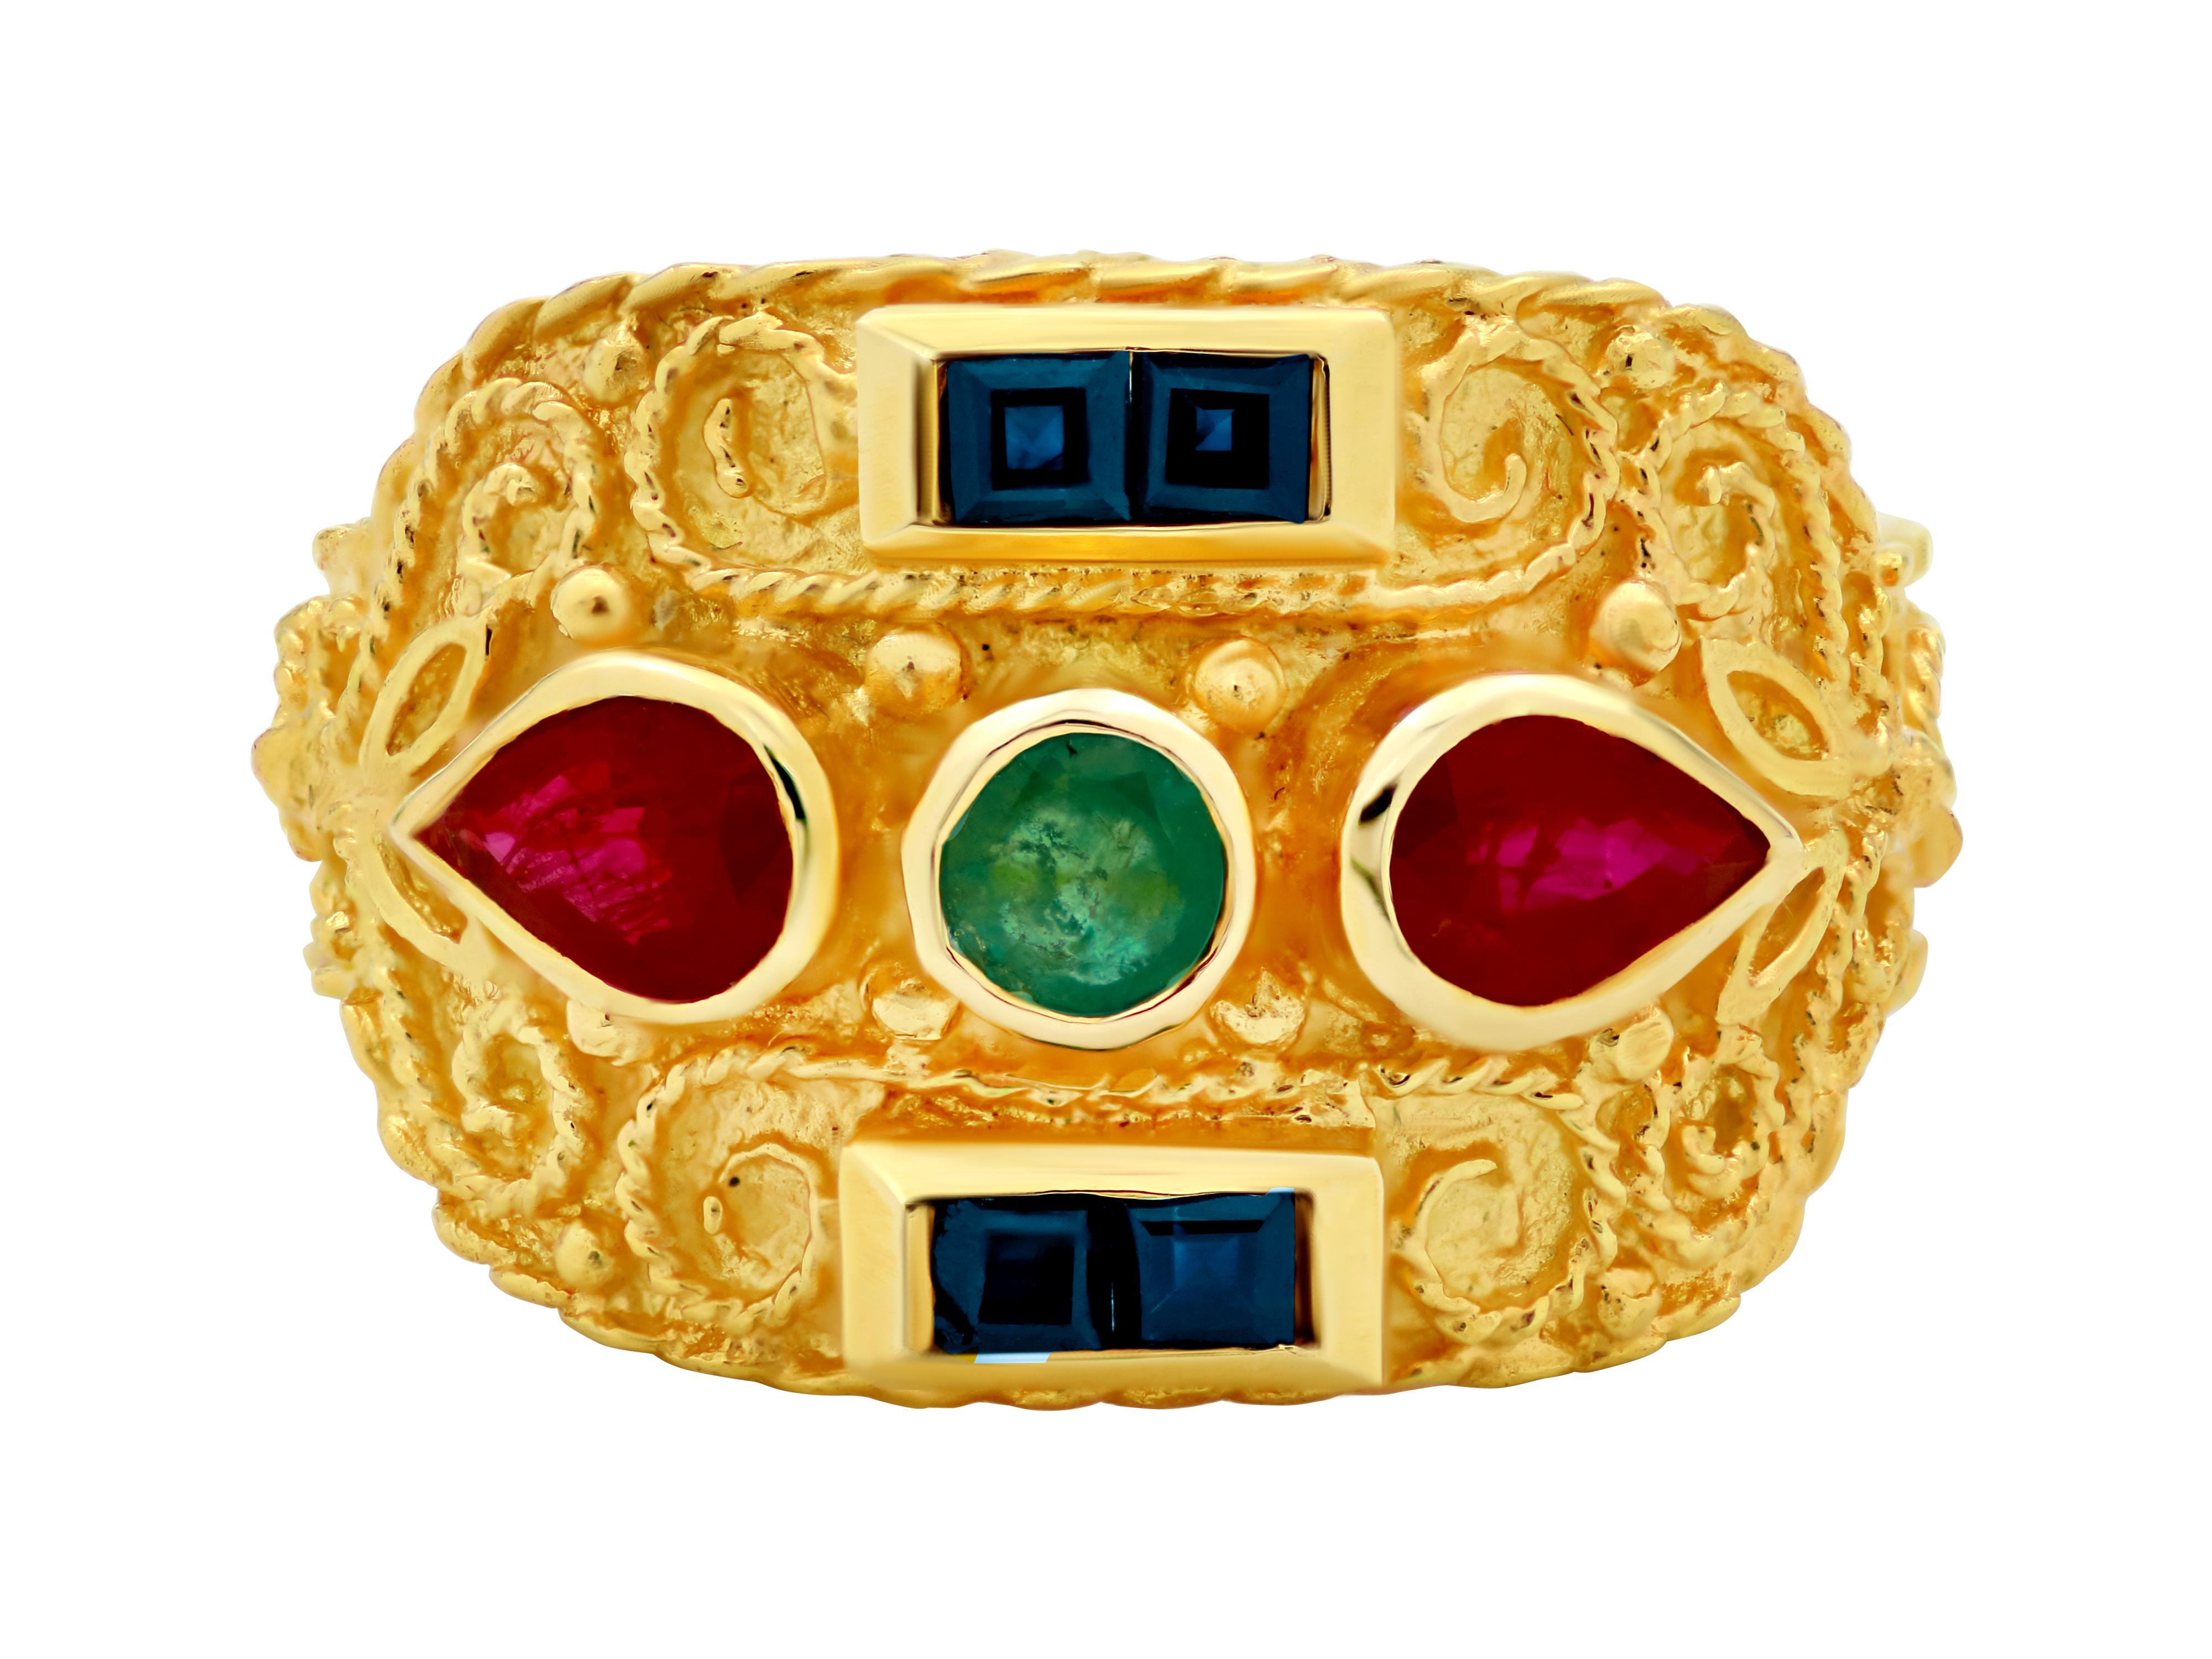 Byzantine ring in 18 karat yellow gold with a dynamic width and a narrow band to give comfort. A variety of 0.60 carats natural gems giving the authentic multicolor look of the Byzantine era. Artwork with filigrees and granulation complete this ring.